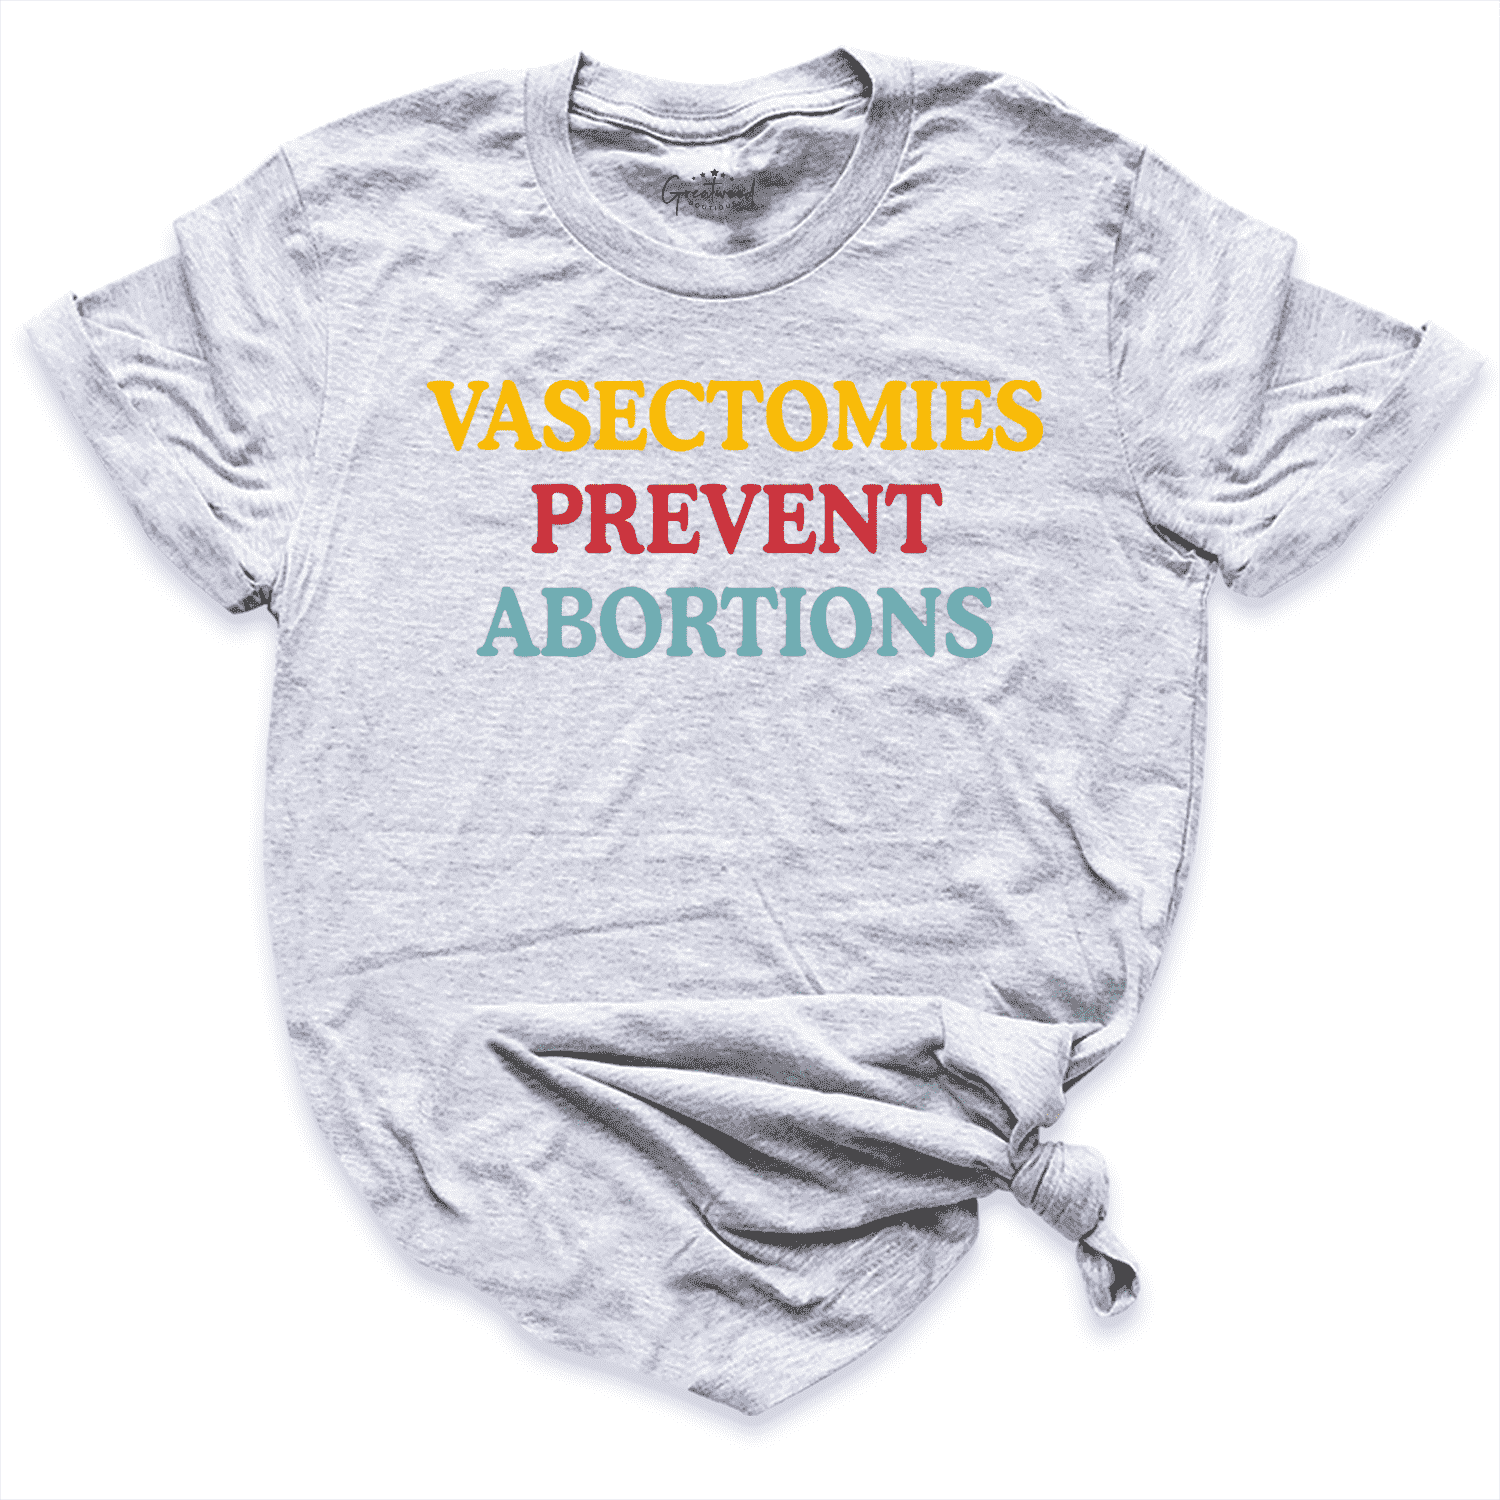 Vasectomies Prevent Abortions Shirt Grey - Greatwood Boutique